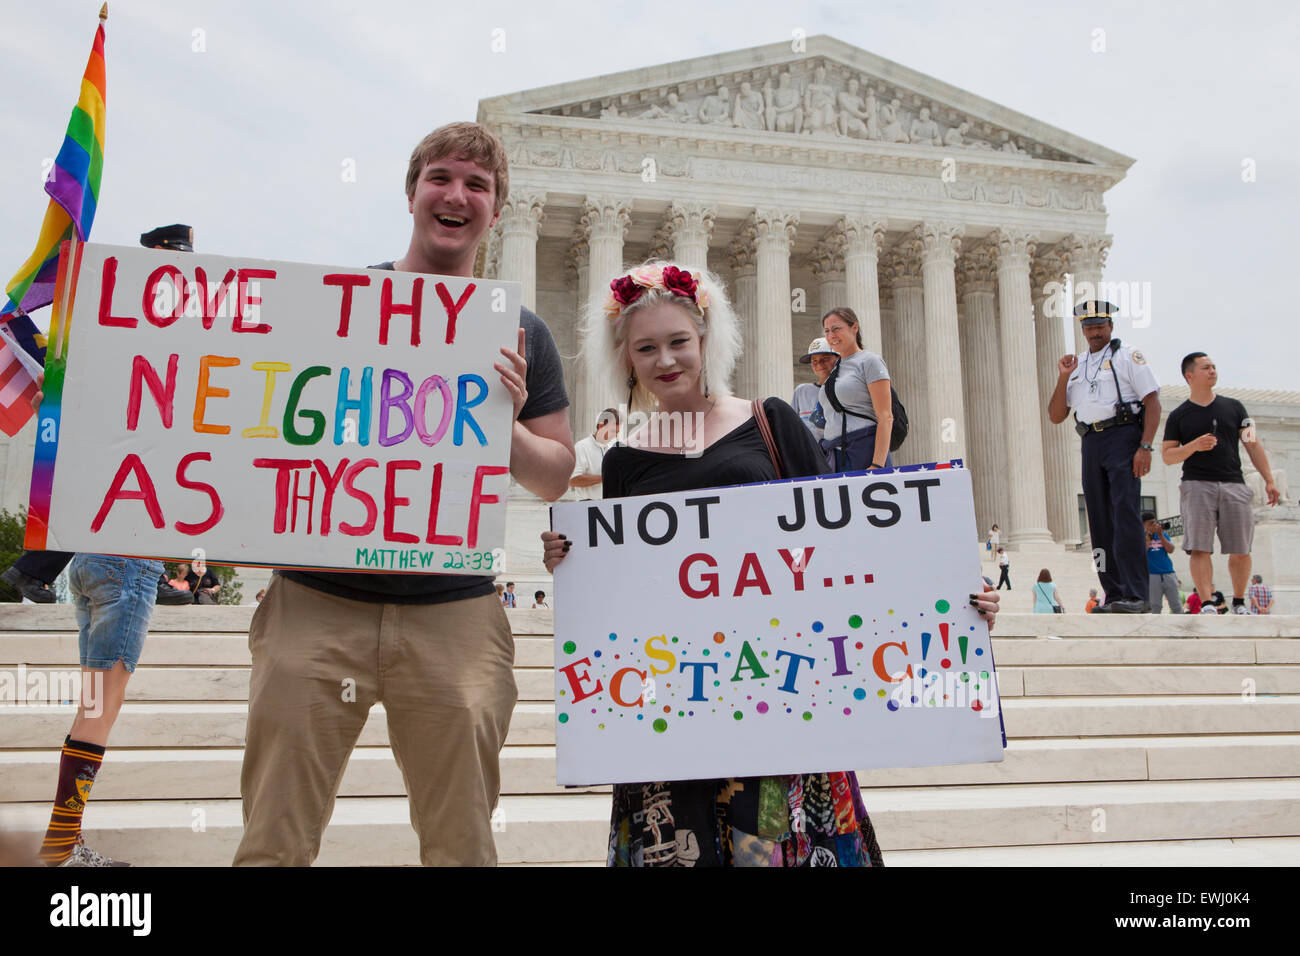 Supreme court legalizes gay marriage nationwide